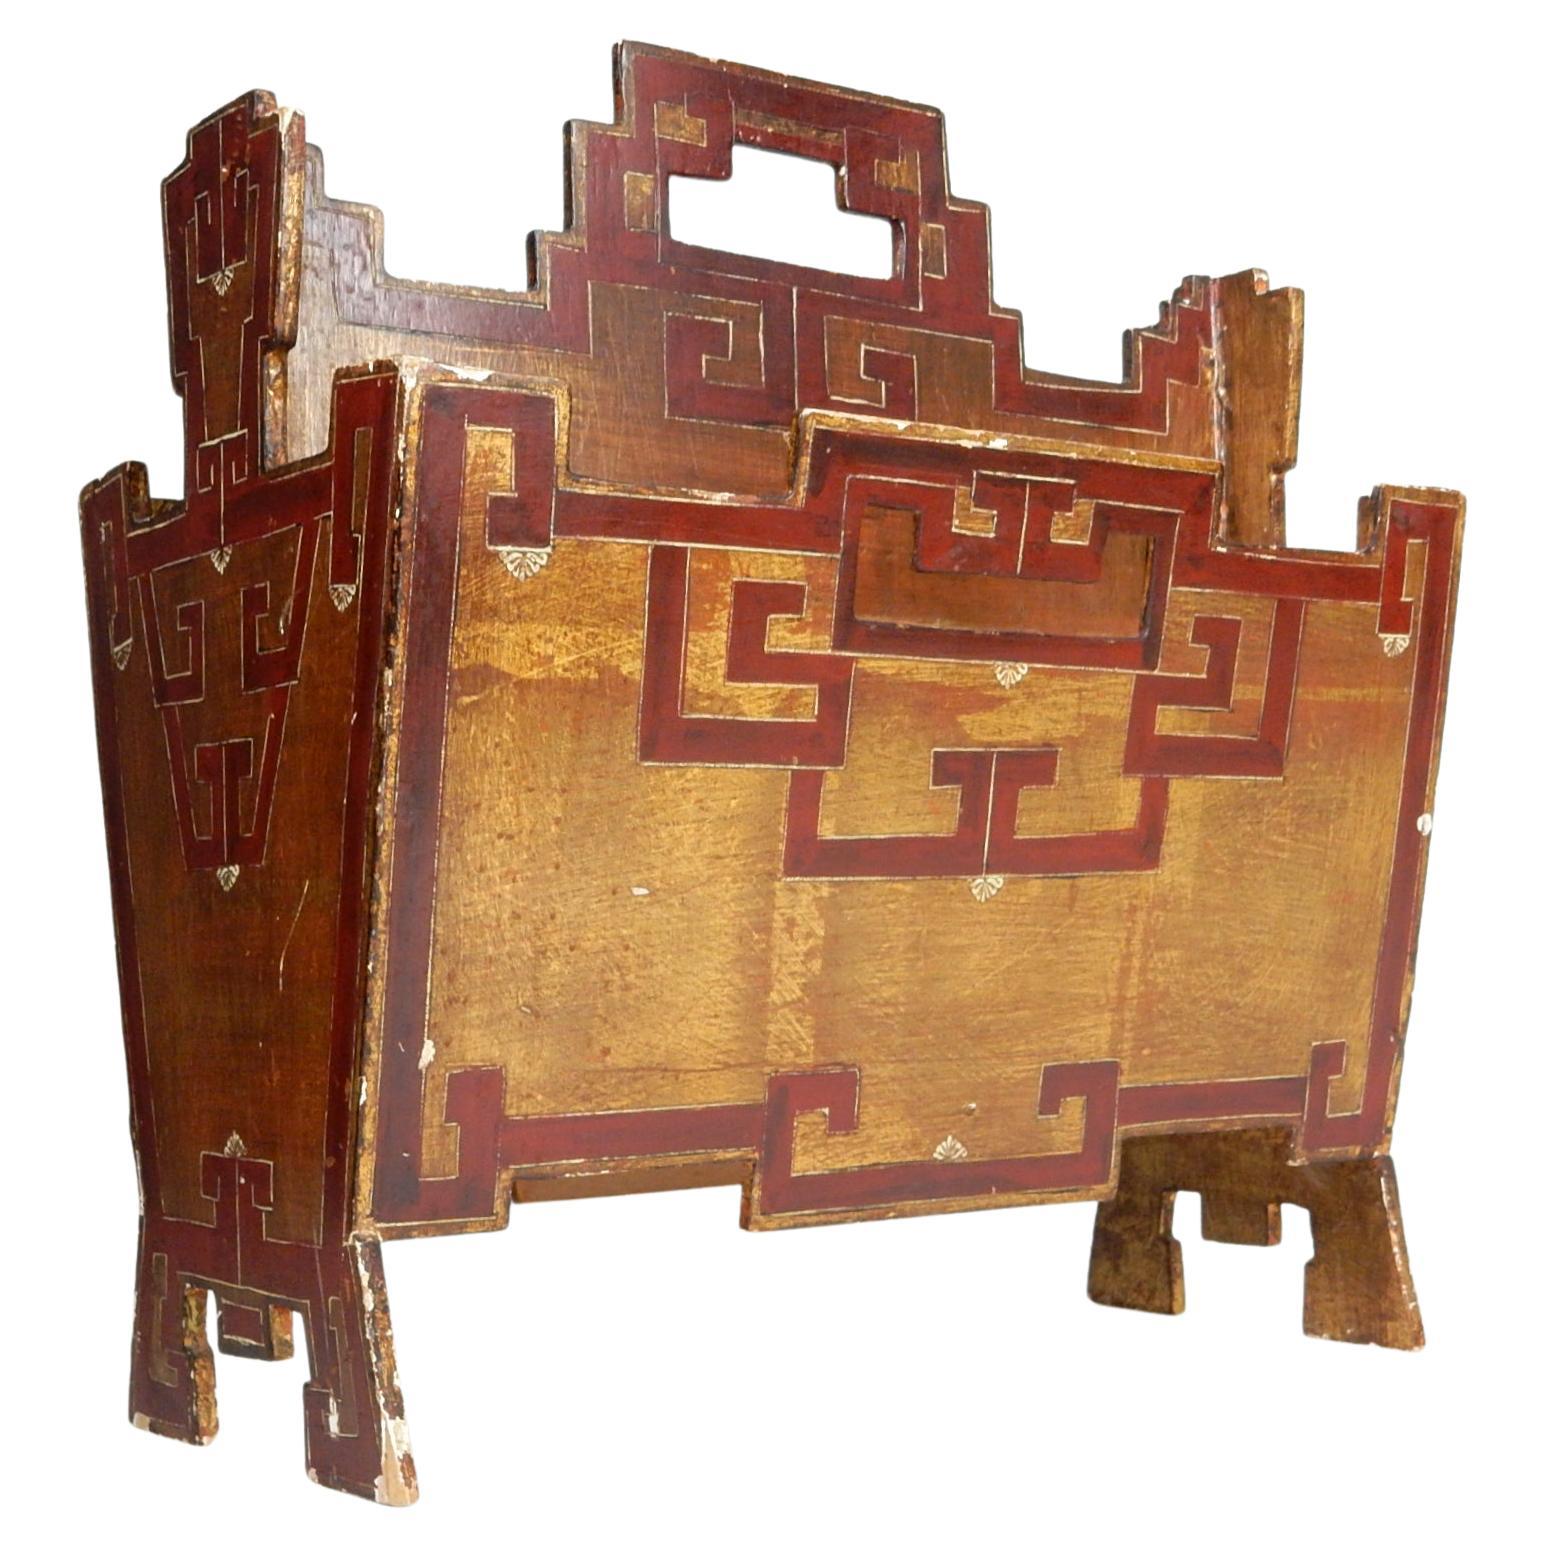 Unique Greek key design on this gilt wood magazine stand from Florentine Italy.
Decorated on all 4 sides. Warm aged patina on gilt enamel.
Signed with paper label on bottom. circa 1950s.